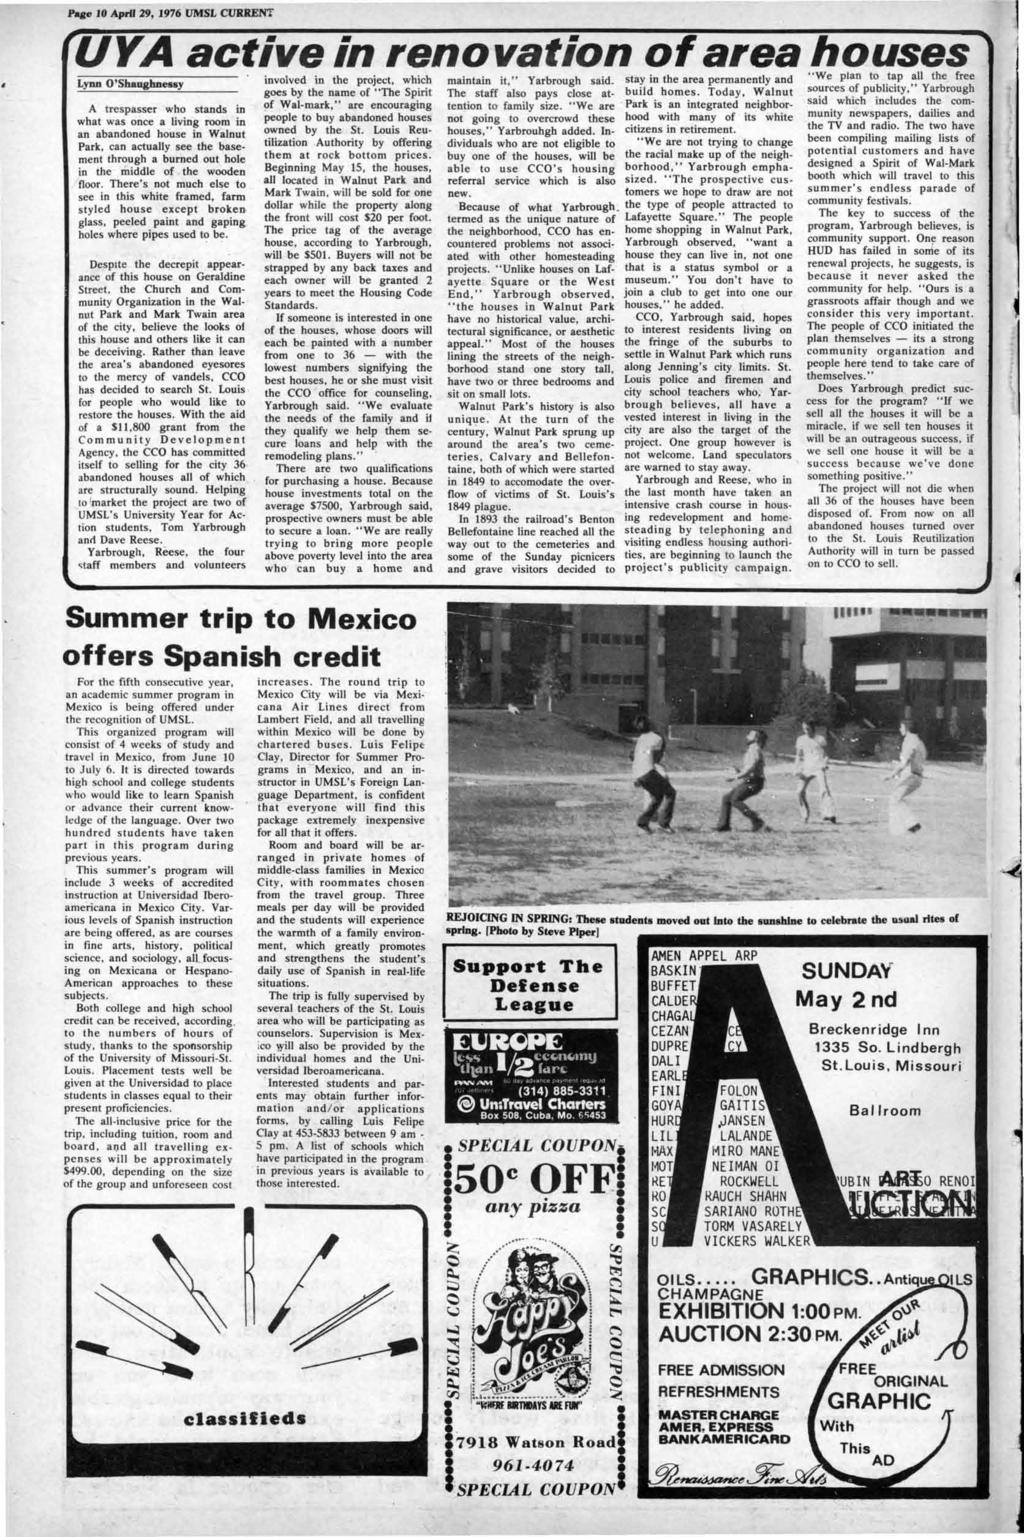 Page AprfJ 29, 1976 UMSL CURRENT UYA active,n renovation of area houses Lynn O'Shaughnessy A trespasser who stands in what was once a living room in an abandoned house in Walnut Park, can actually